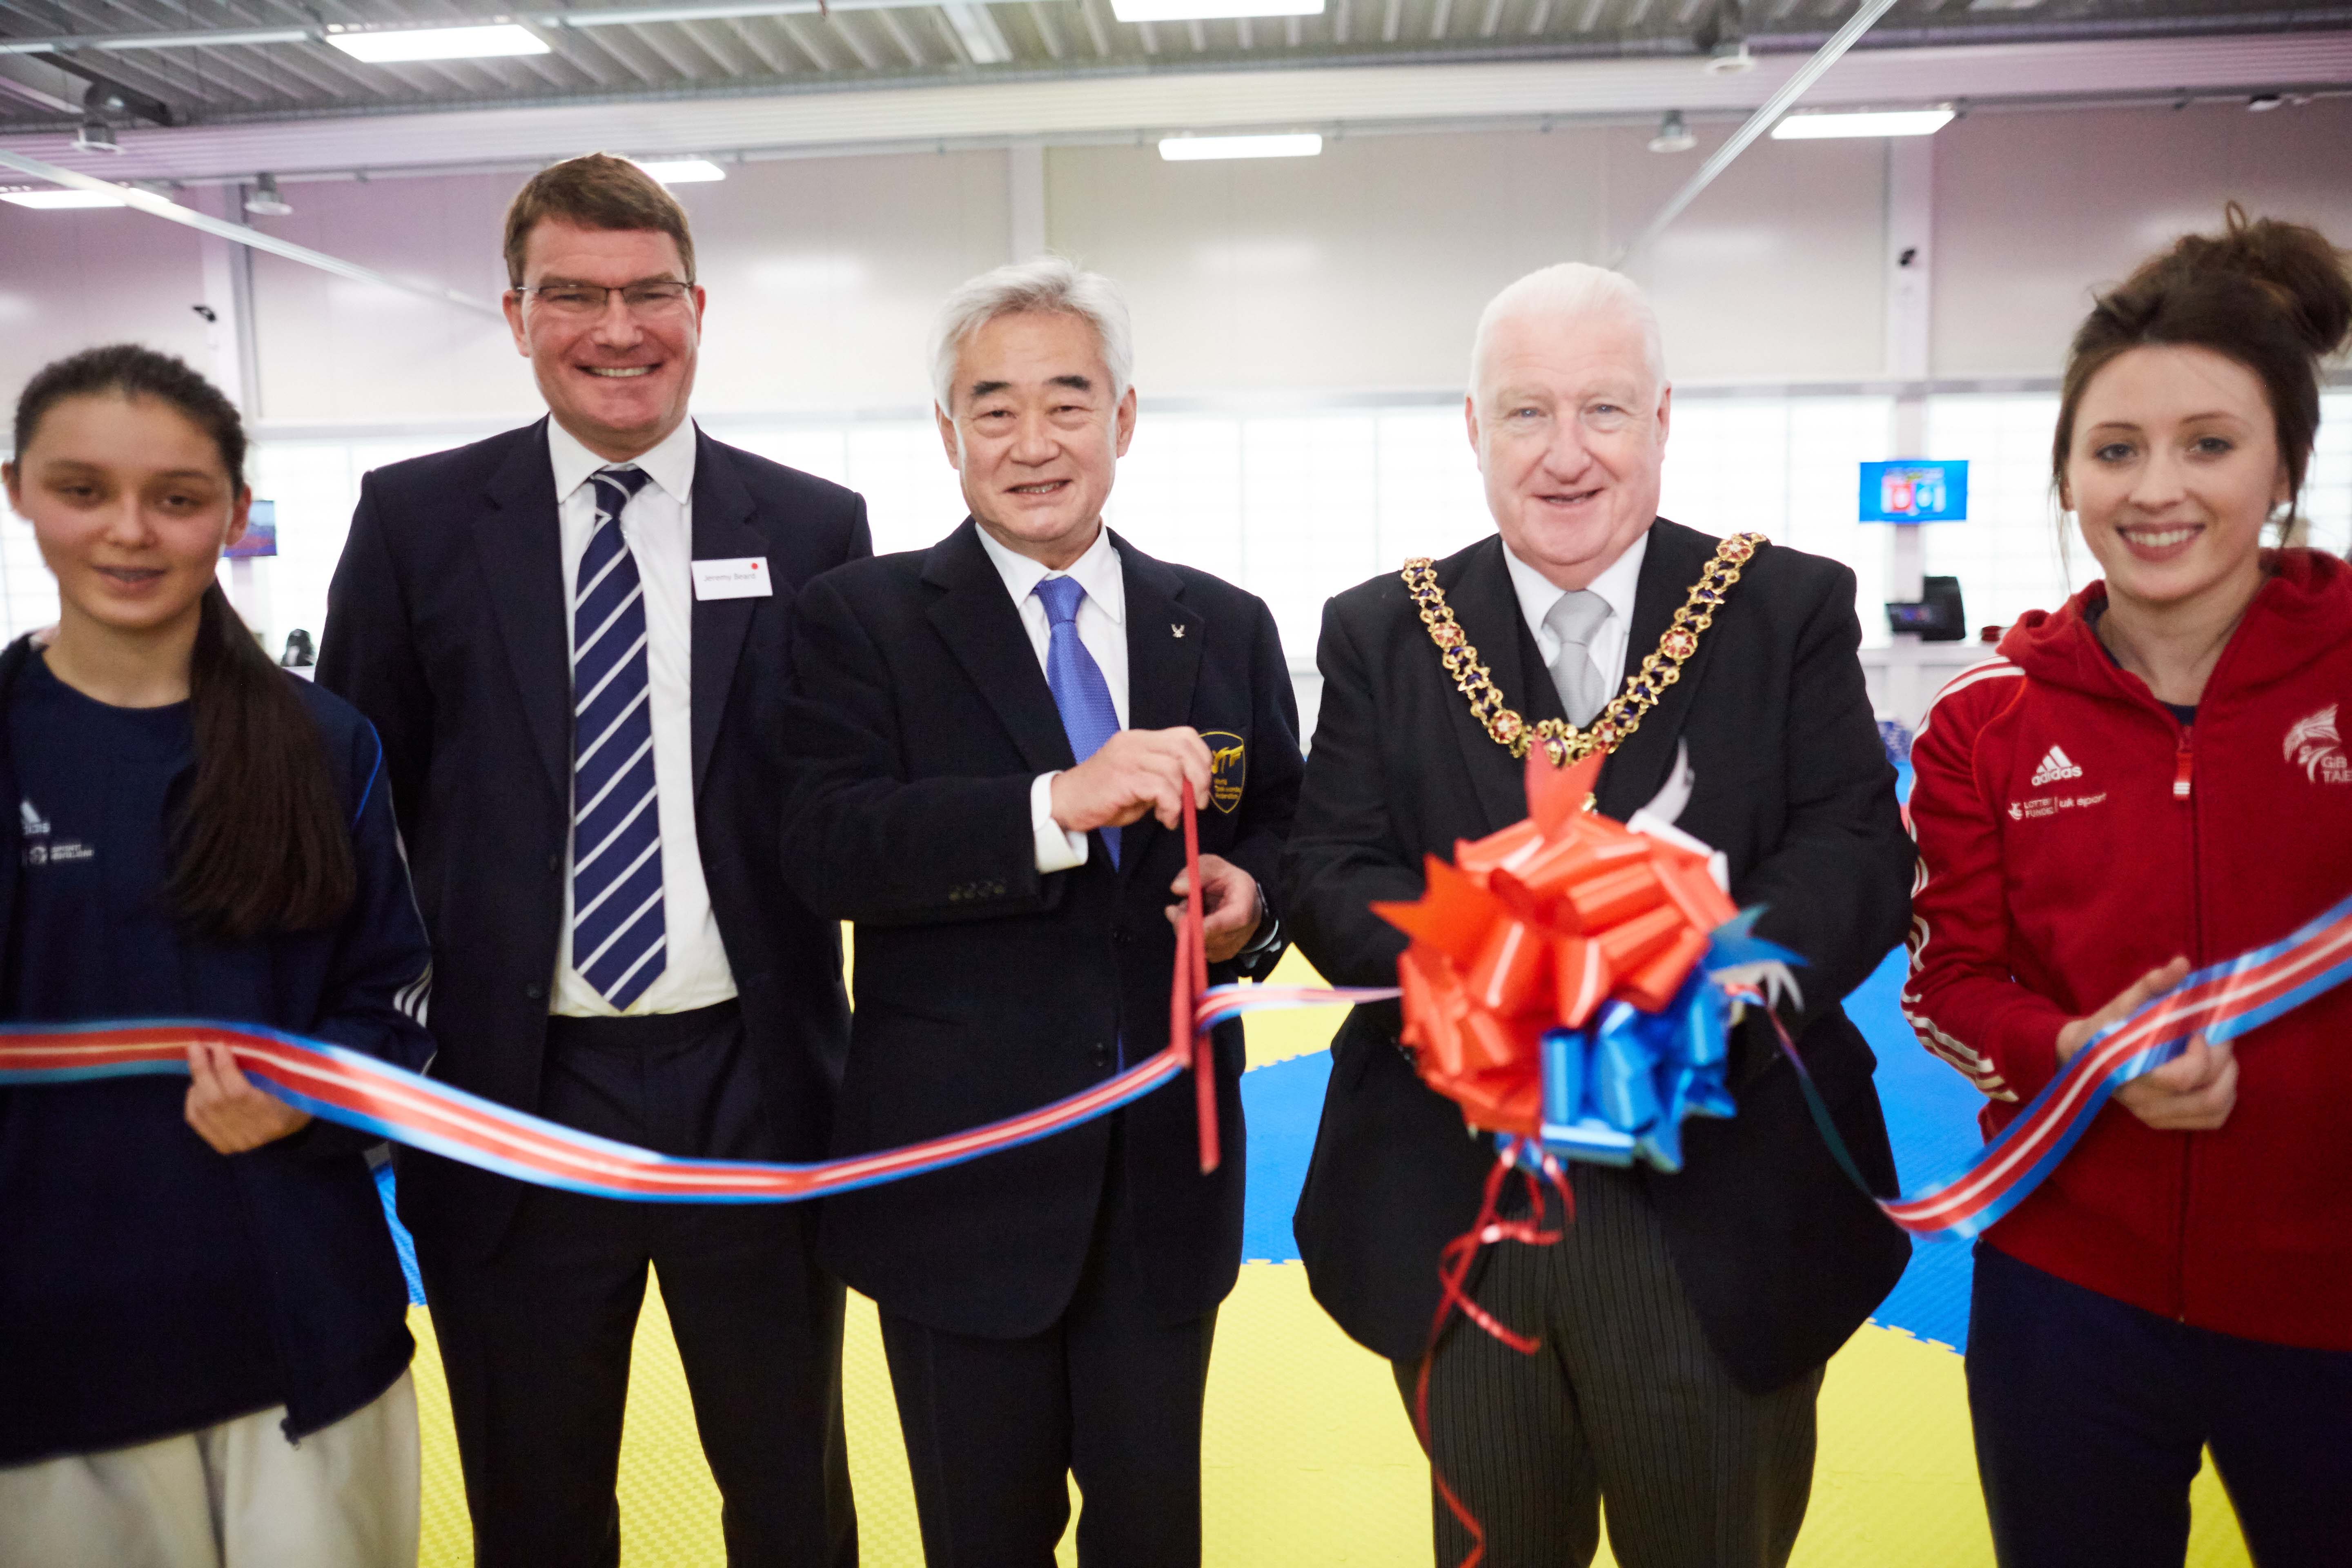 National Taekwondo Centre in Manchester official opening of the new Centre after a £3m transformation. Pictured Chungwon Choue, President of the World Taekwondo Federation opens the new centre